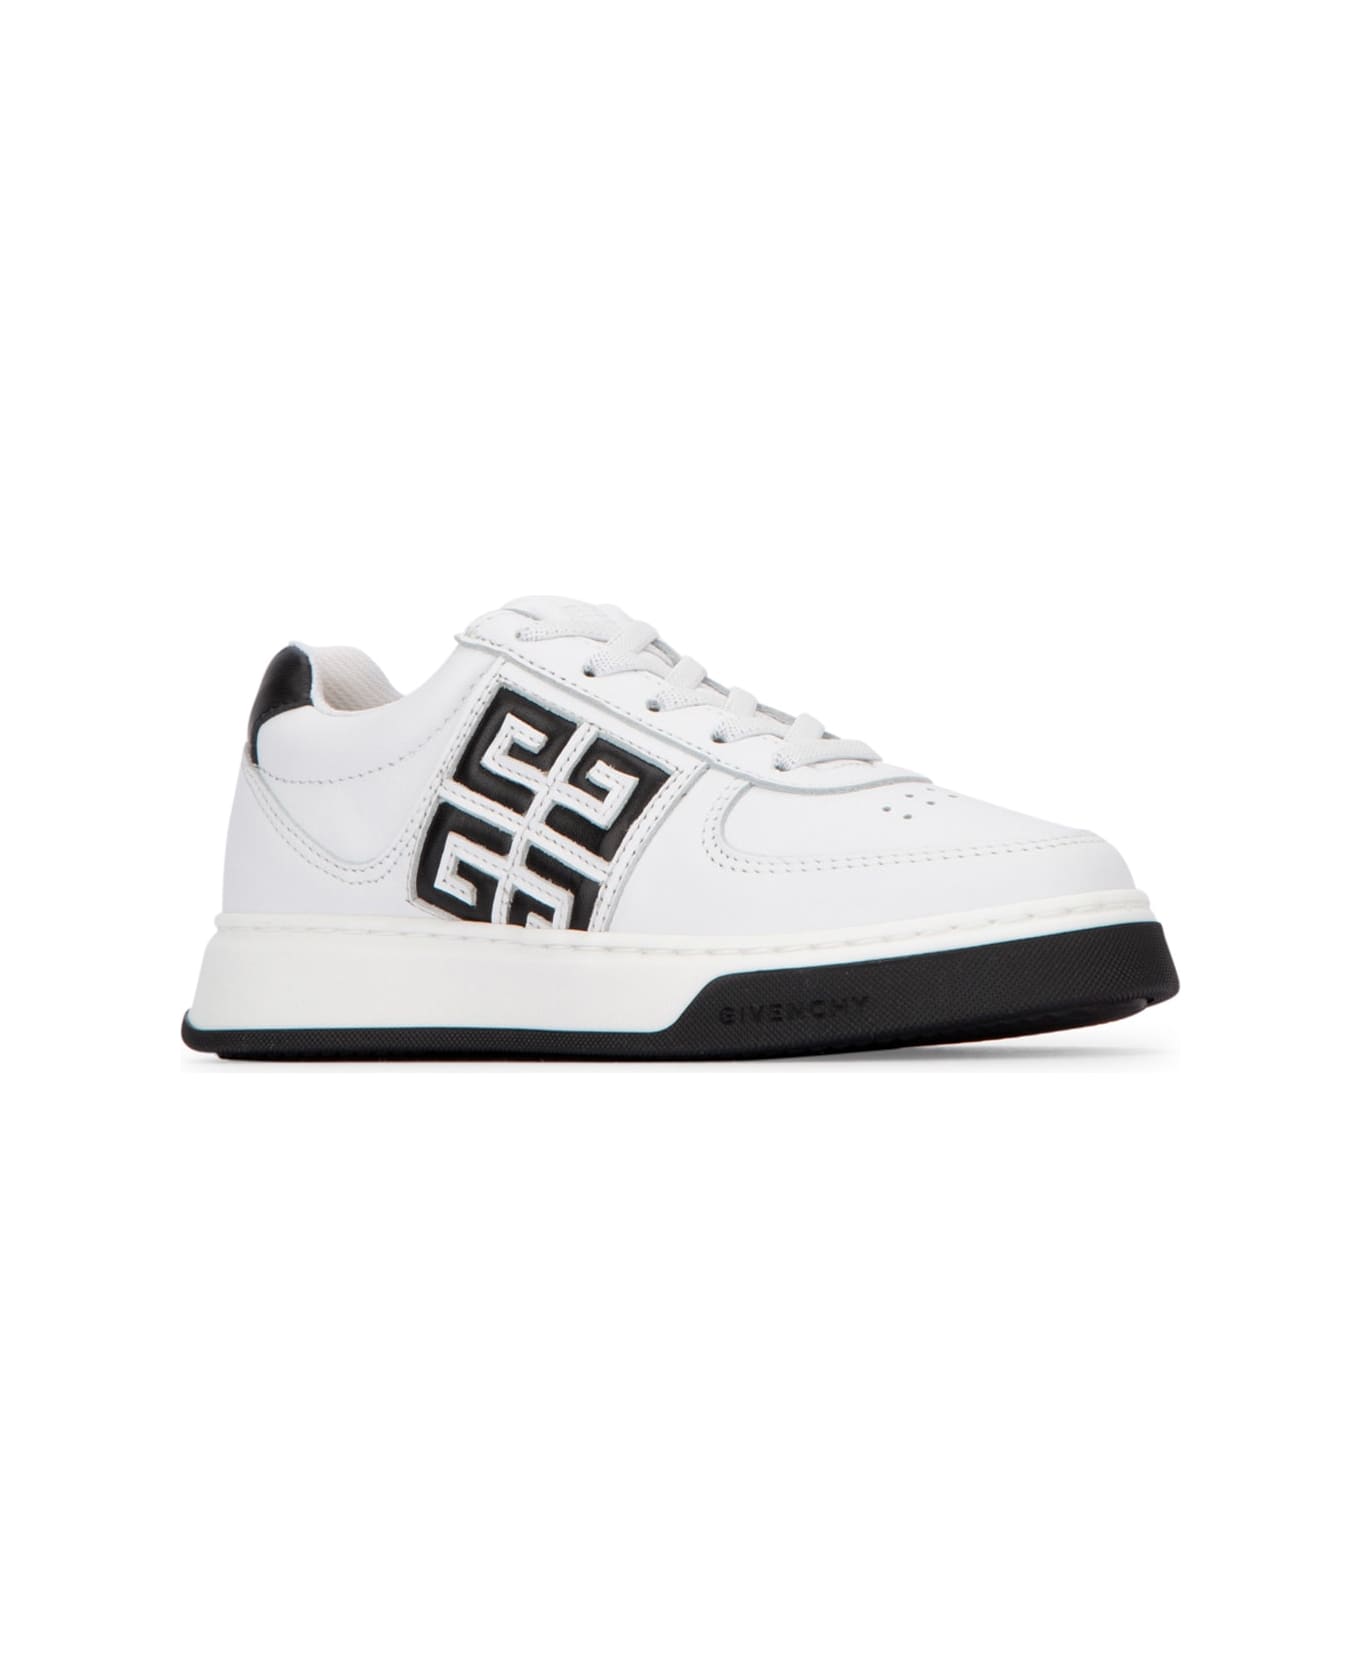 Givenchy Sneakers - White シューズ